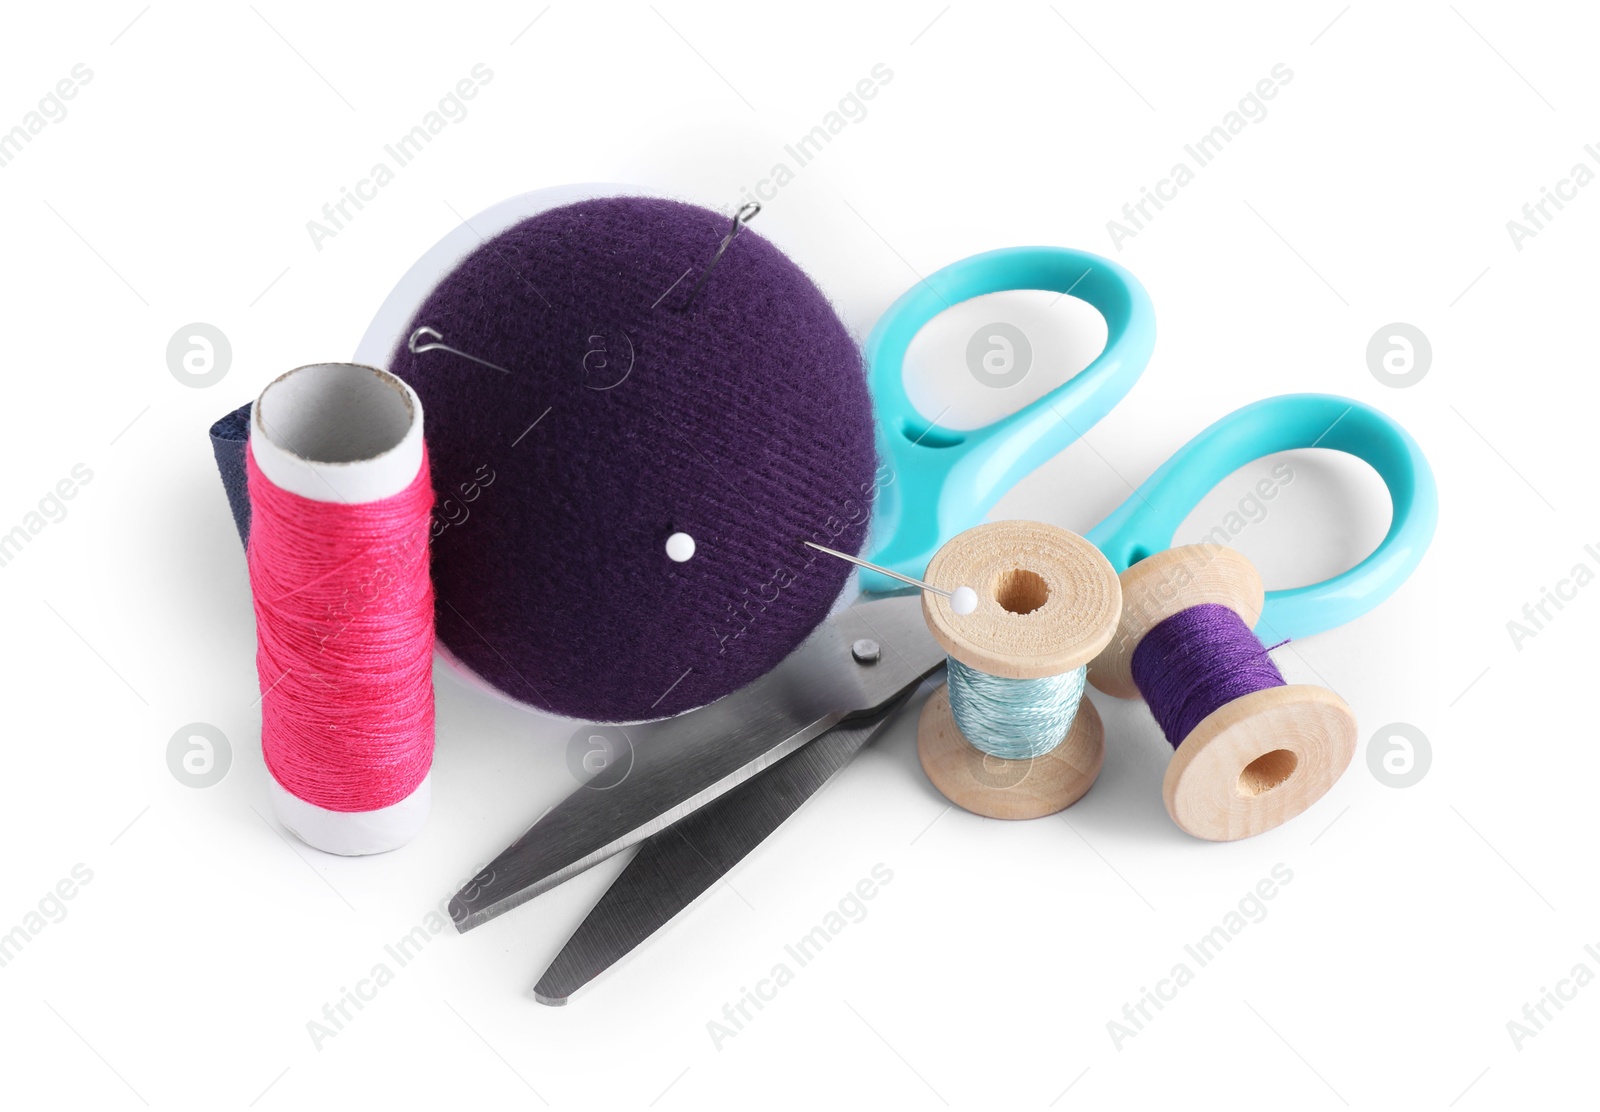 Photo of Pincushion, sewing needles, pins, spools of threads and scissors isolated on white